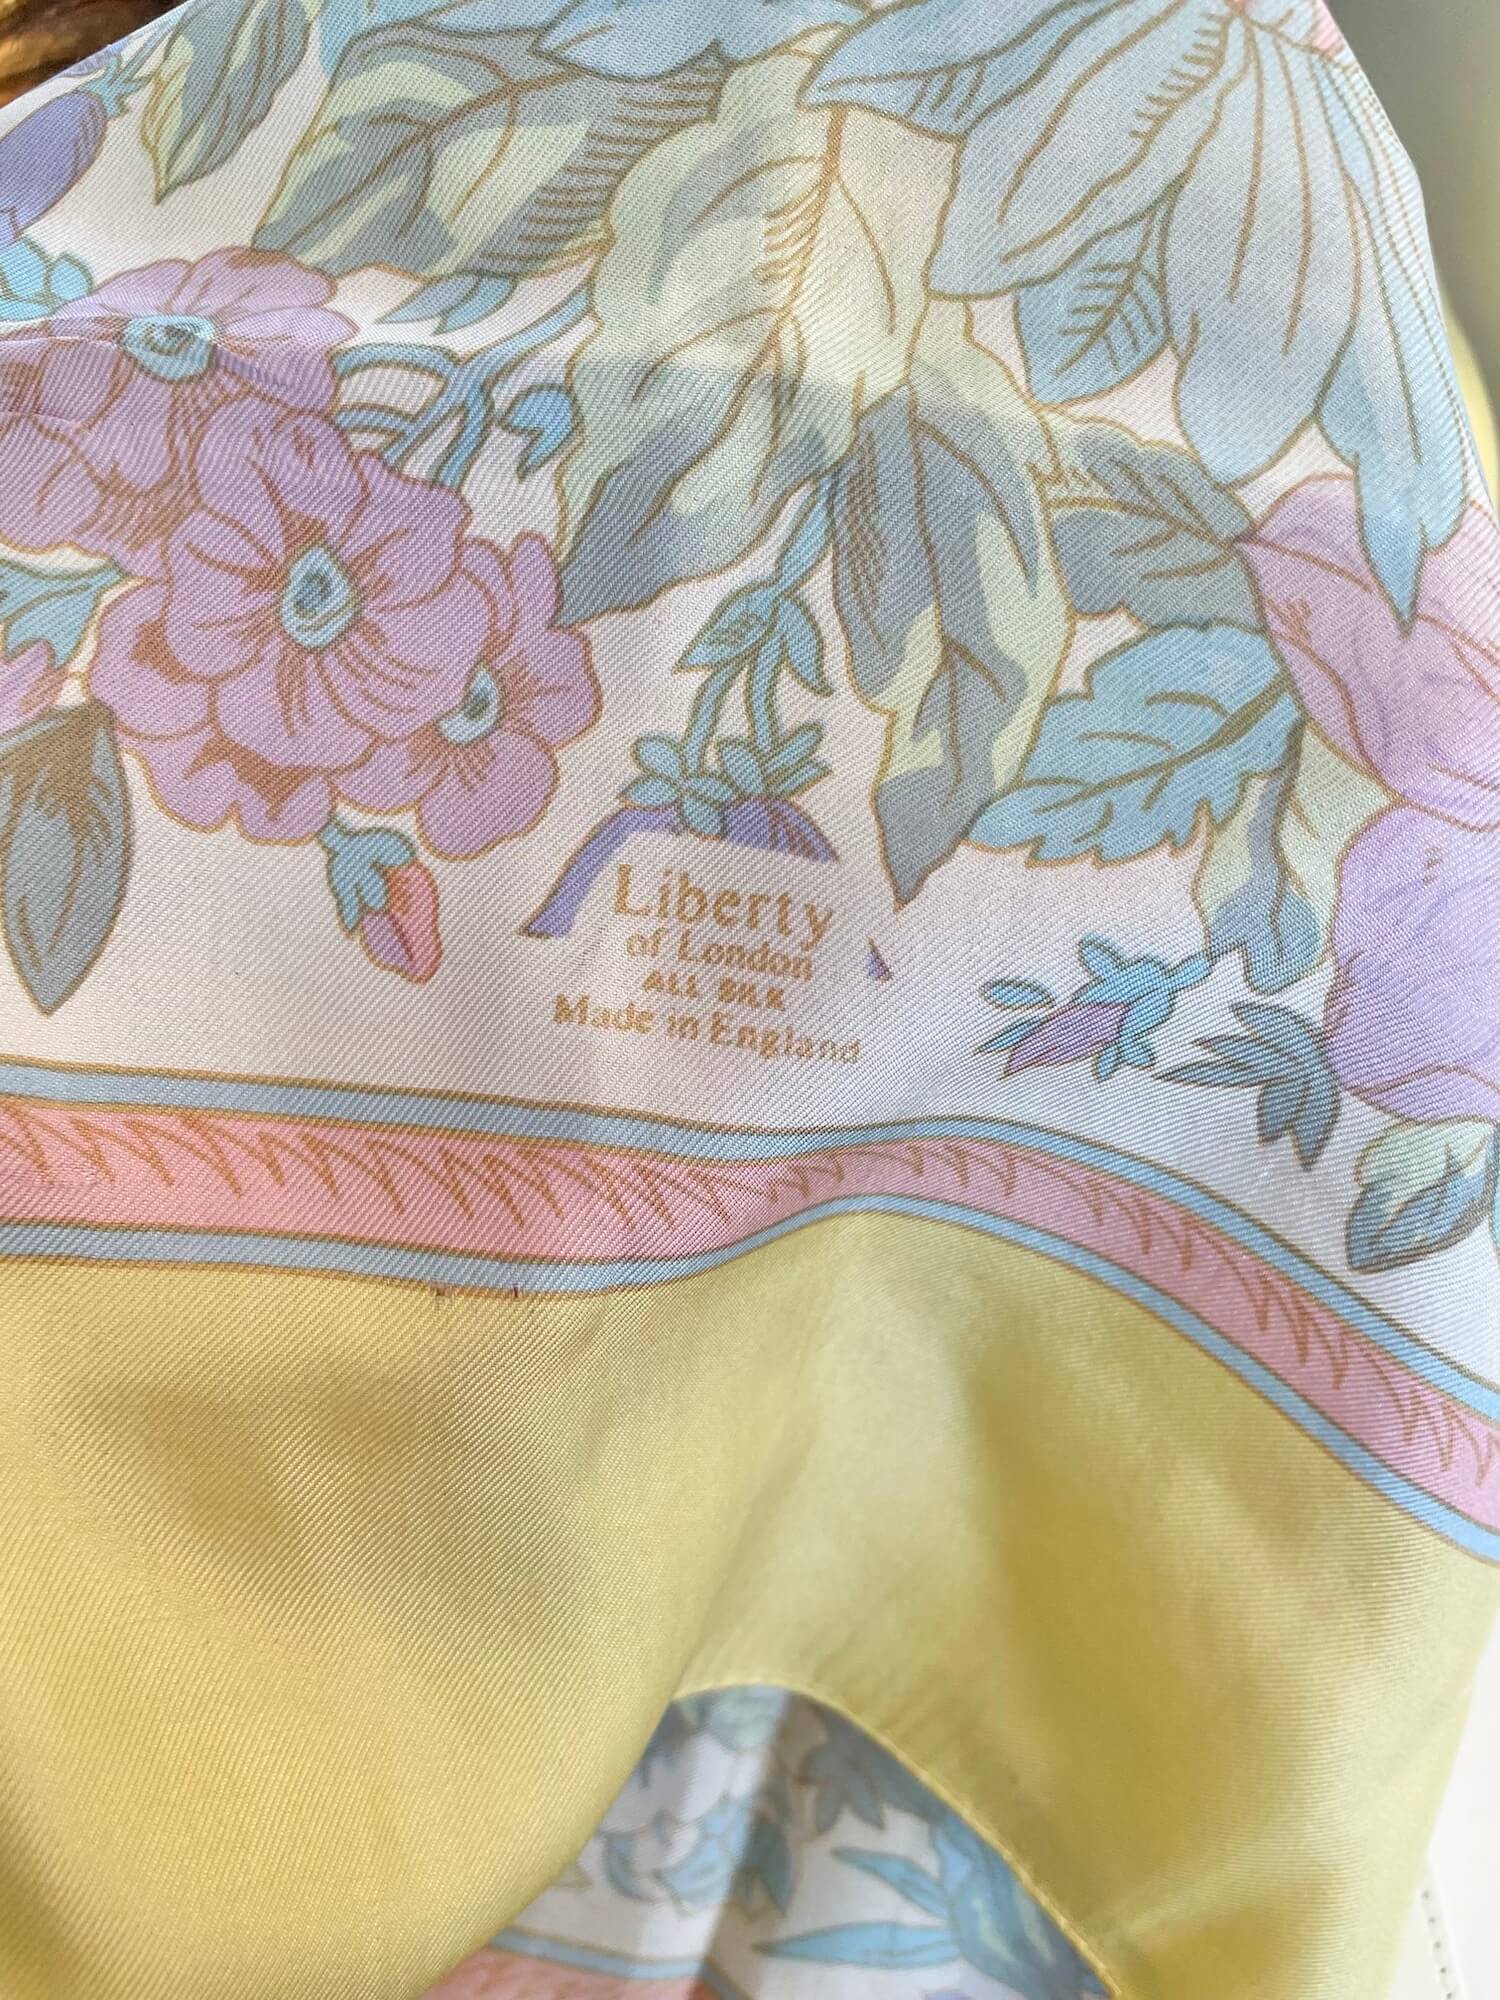 Vintage Liberty of London silk floral scarf.